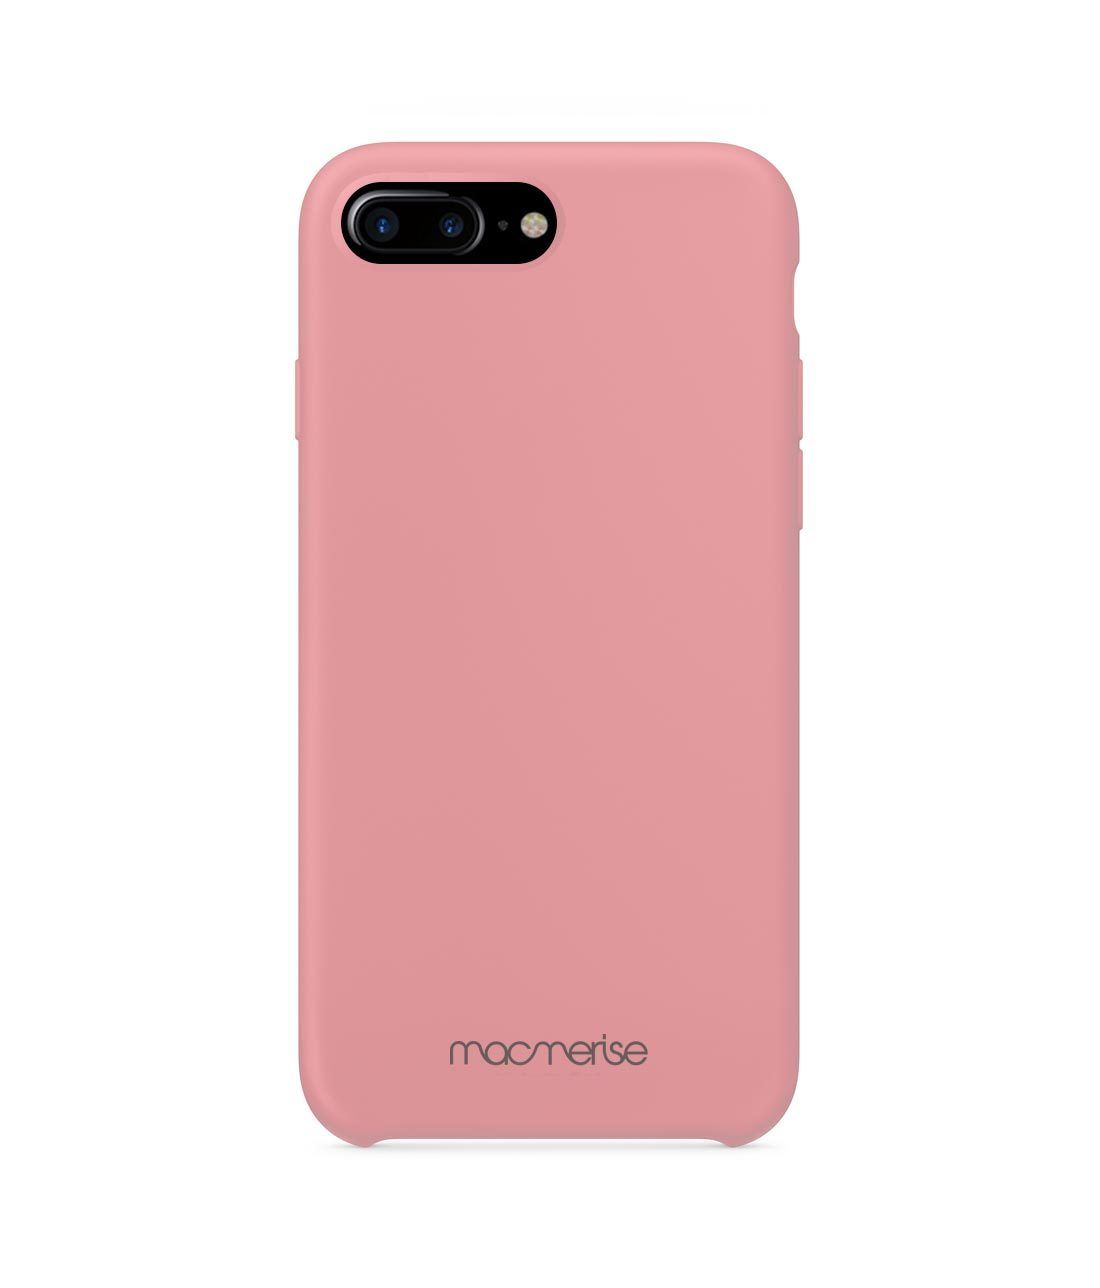 Silicone Phone Case Blush Pink - Silicone Phone Case for iPhone 7 Plus